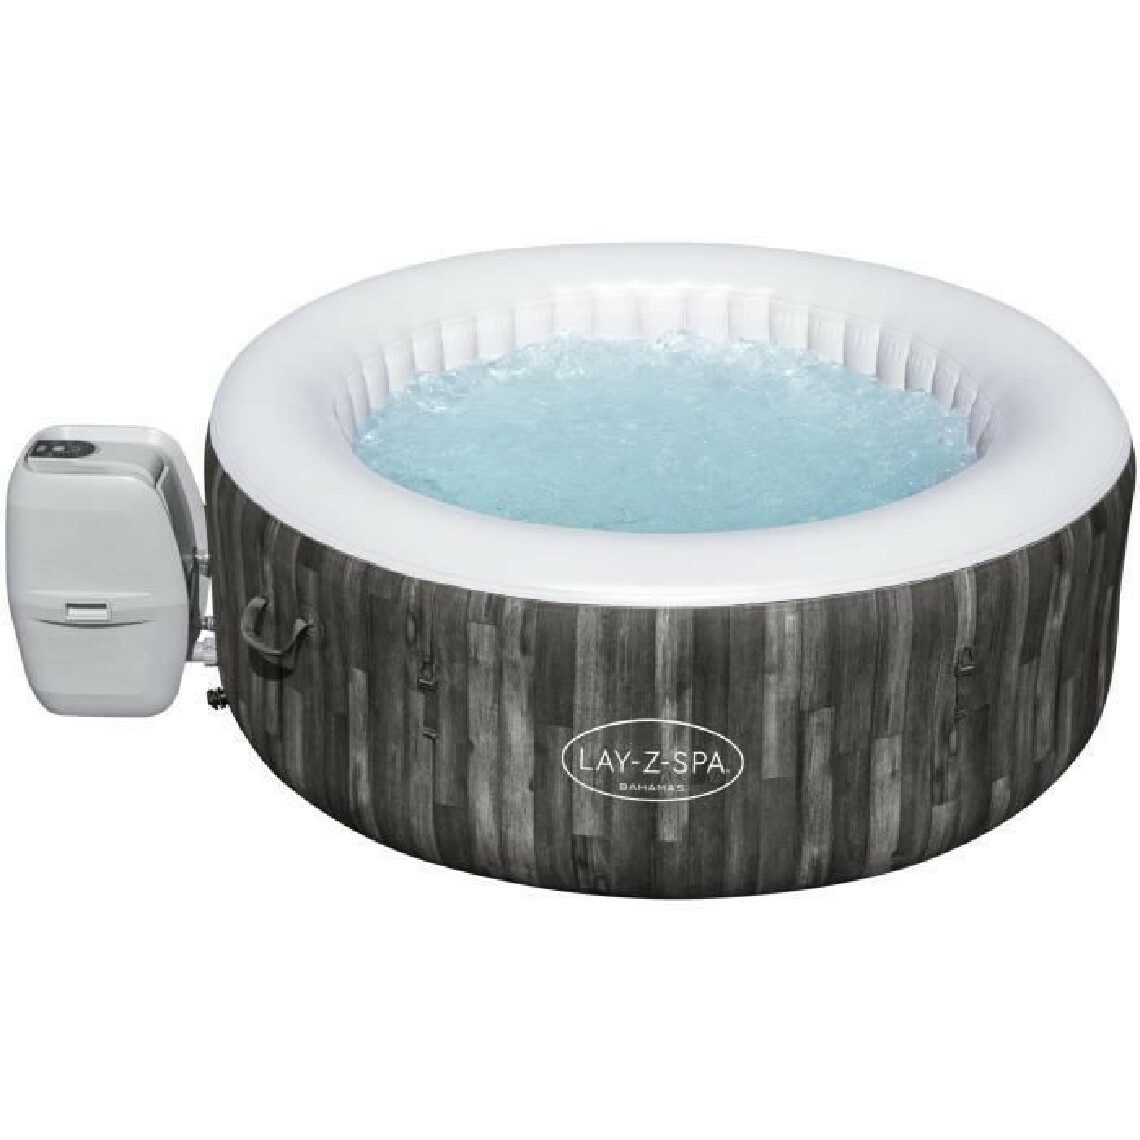 Bestway - Spa gonflable rond Lay-Z-Spa Bahamas Airjet motif bois 2 a 4 personnes, 180 x 66 cm - Spa gonflable